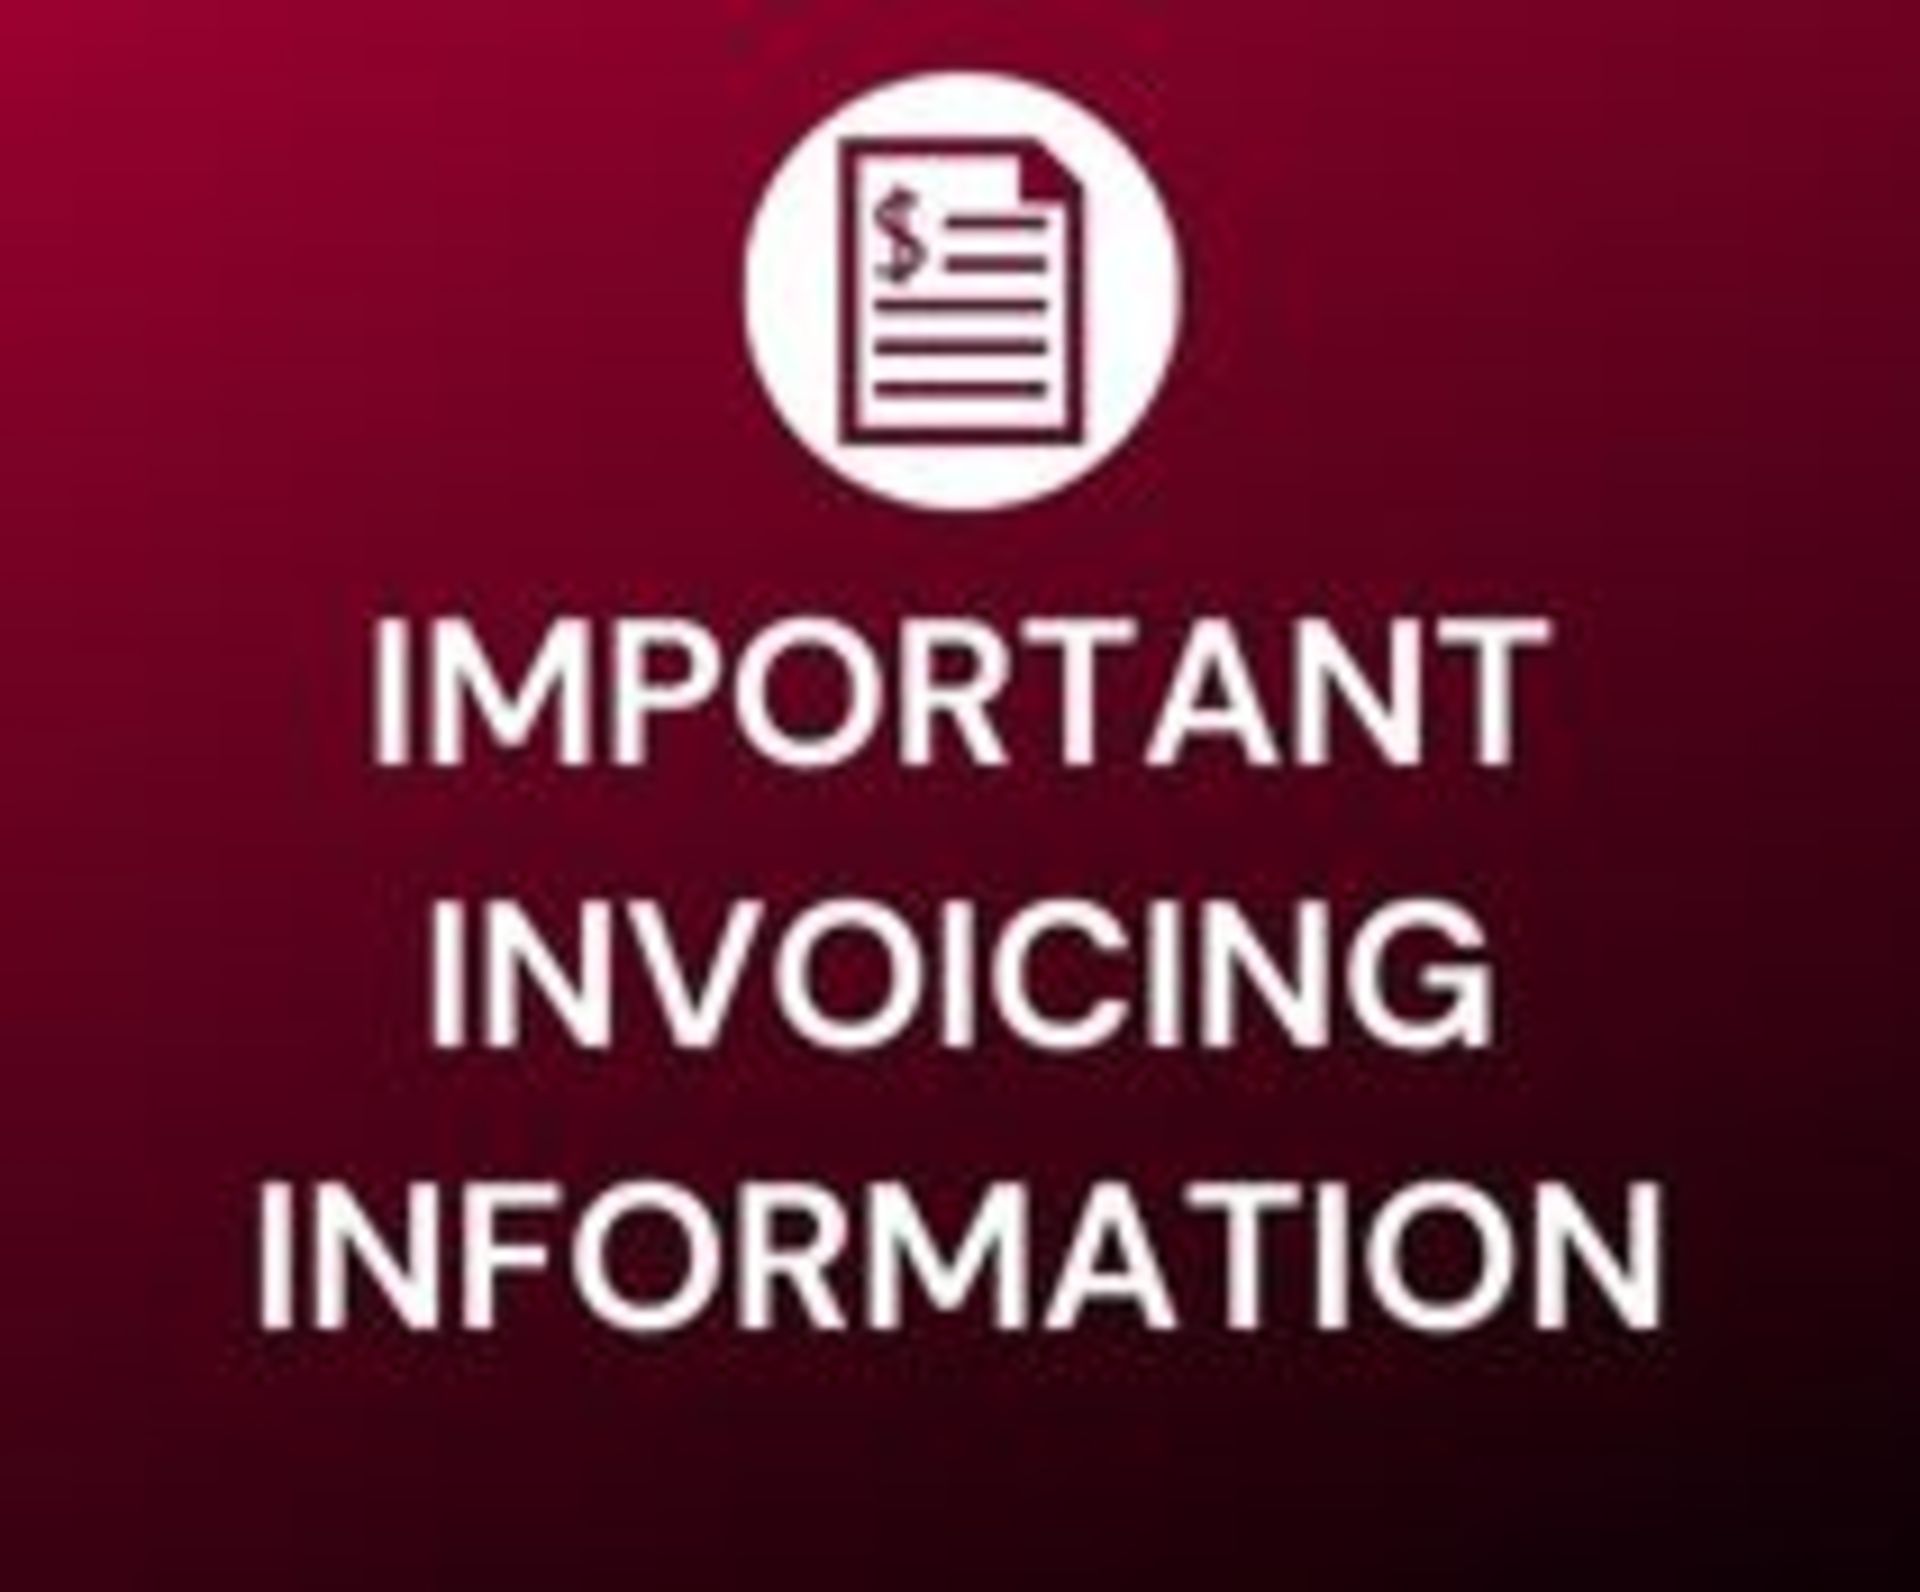 IMPORTANT INVOICING INFORMATION